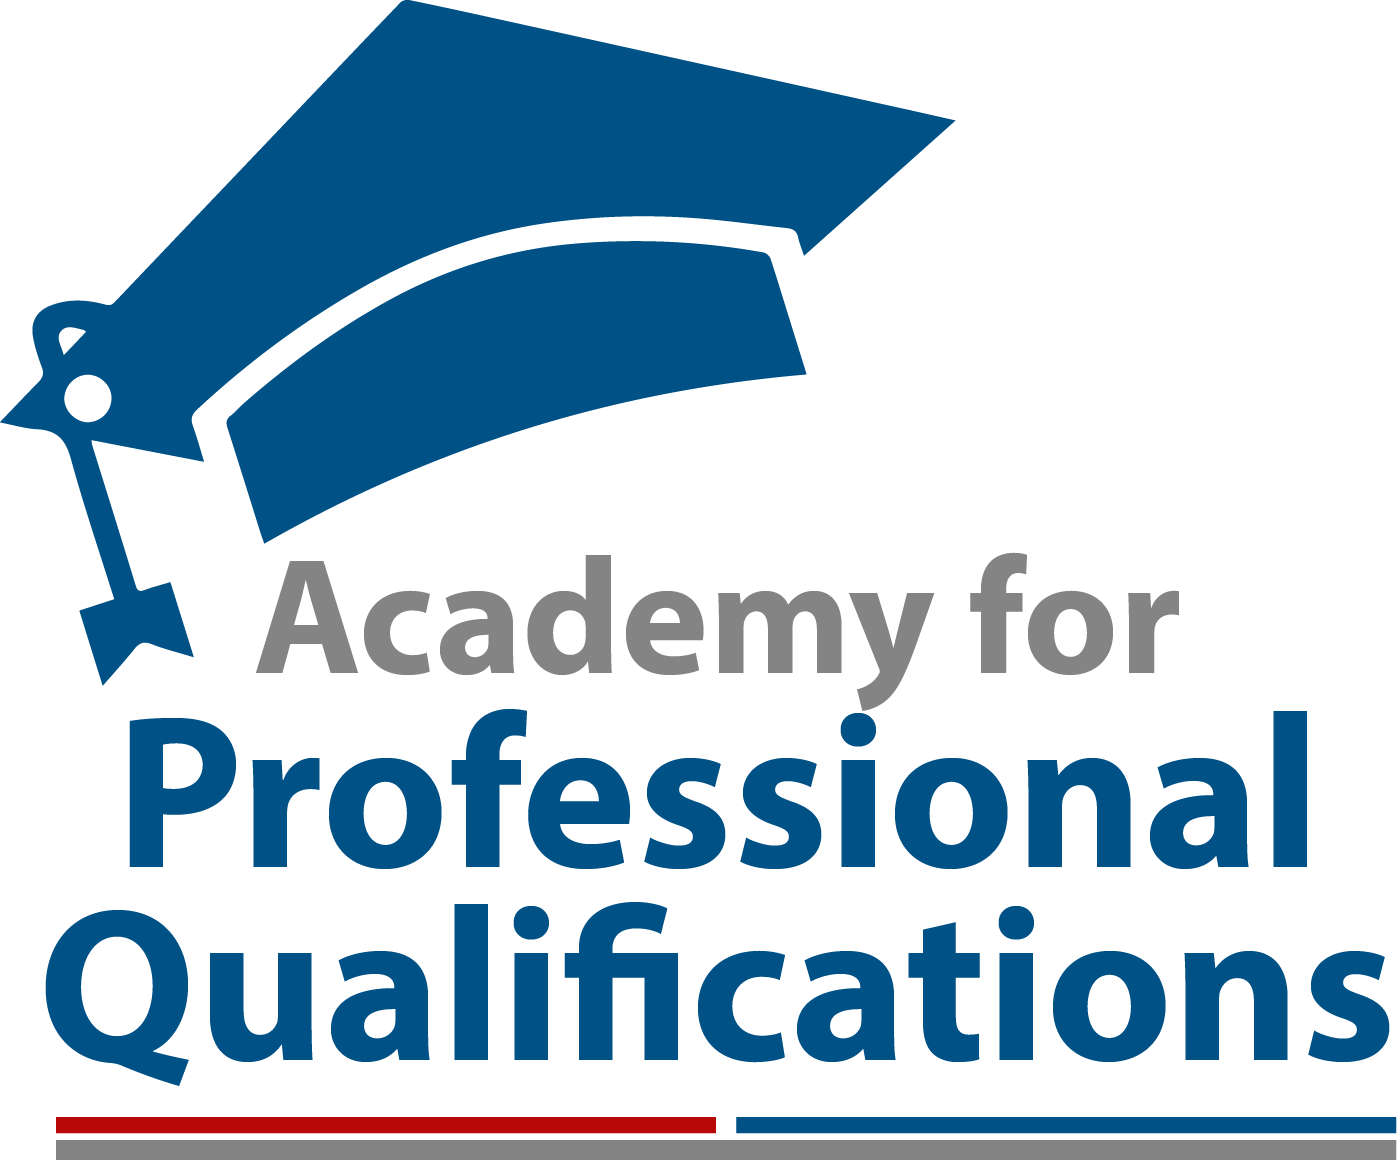 Academy for Professional Qualifications logo